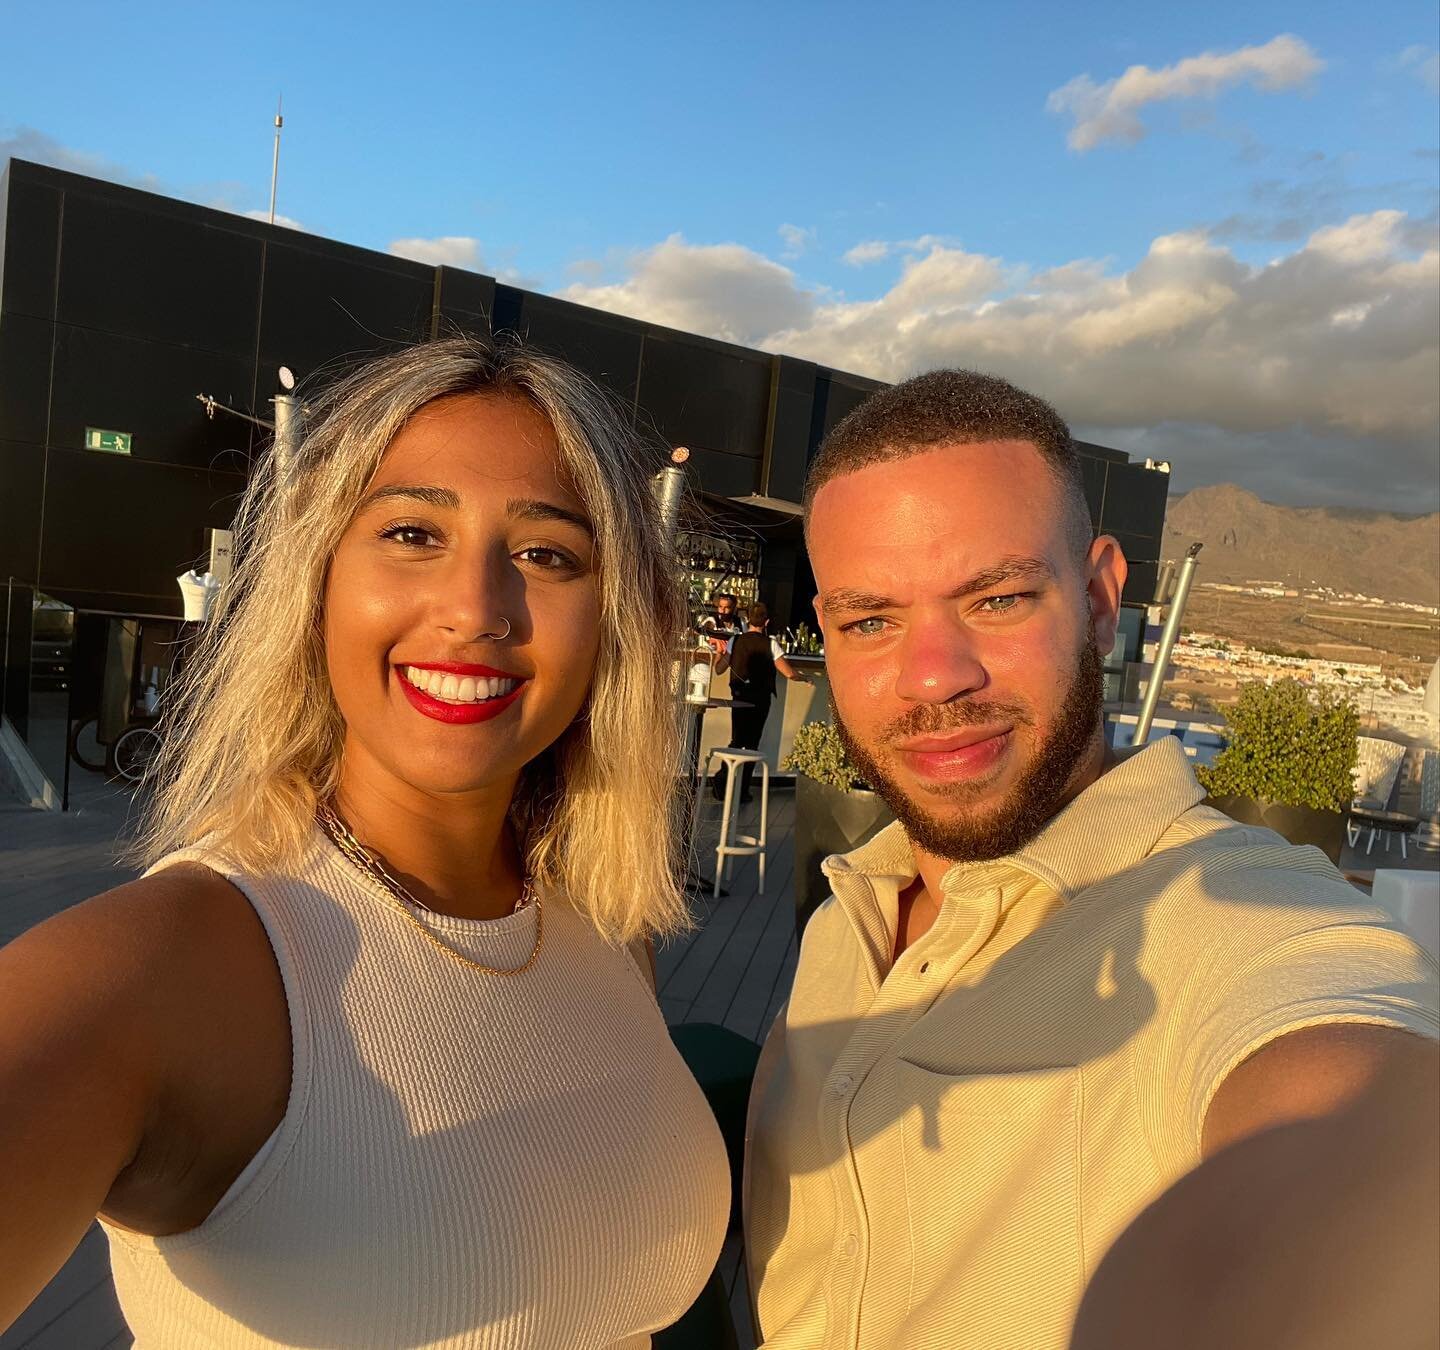 Some pics of me and my fianc&eacute; and the sunset 😍✨🌅